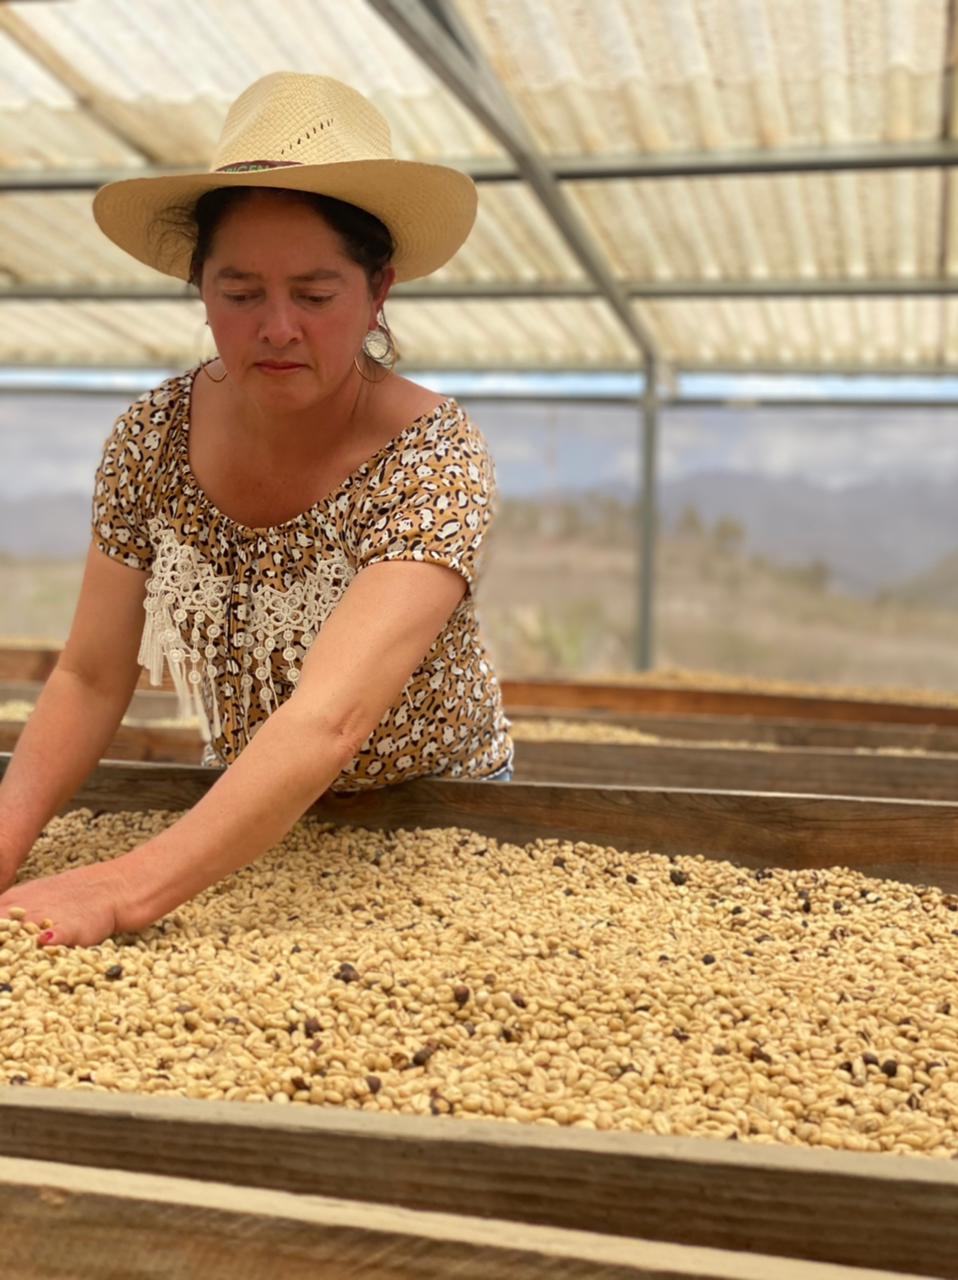 Prioritising sustainability in coffee farming and production | Caravan Coffee Roasters